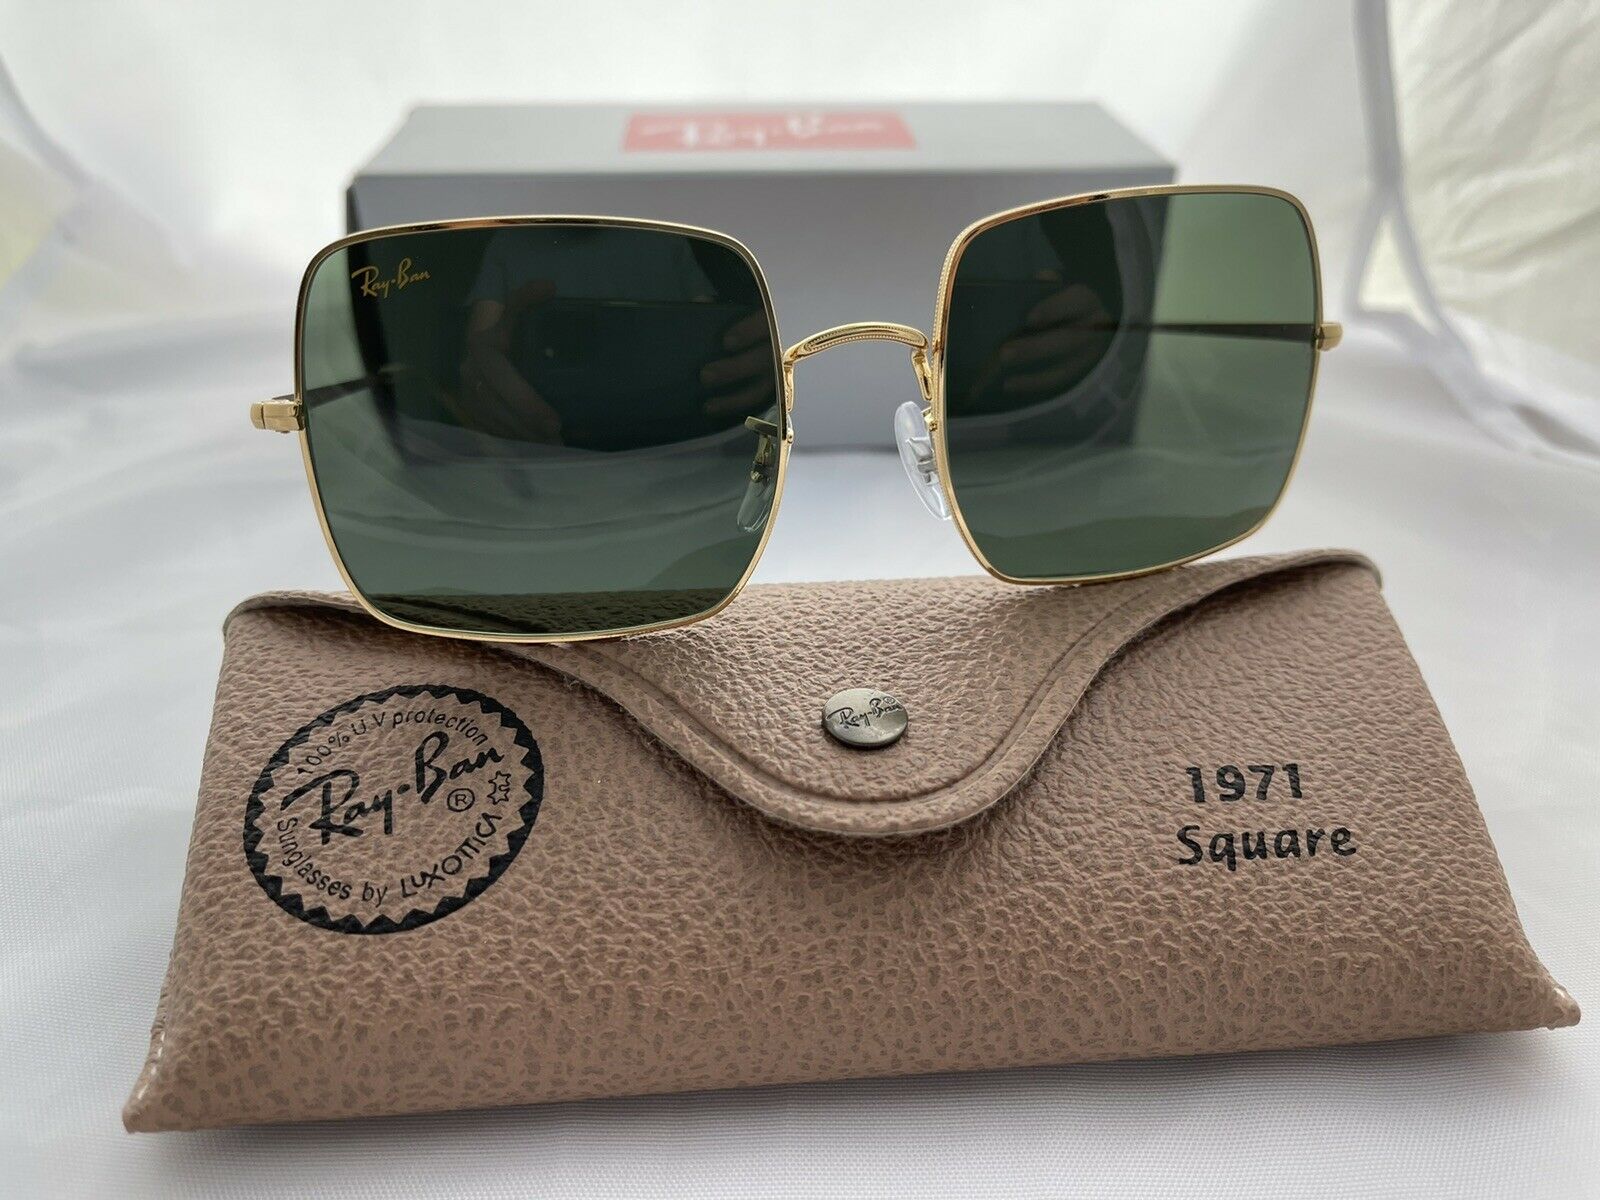 Ray-Ban SQUARE RB 1971 Gold/Green (9147/31) Sunglasses – Shade Review Store